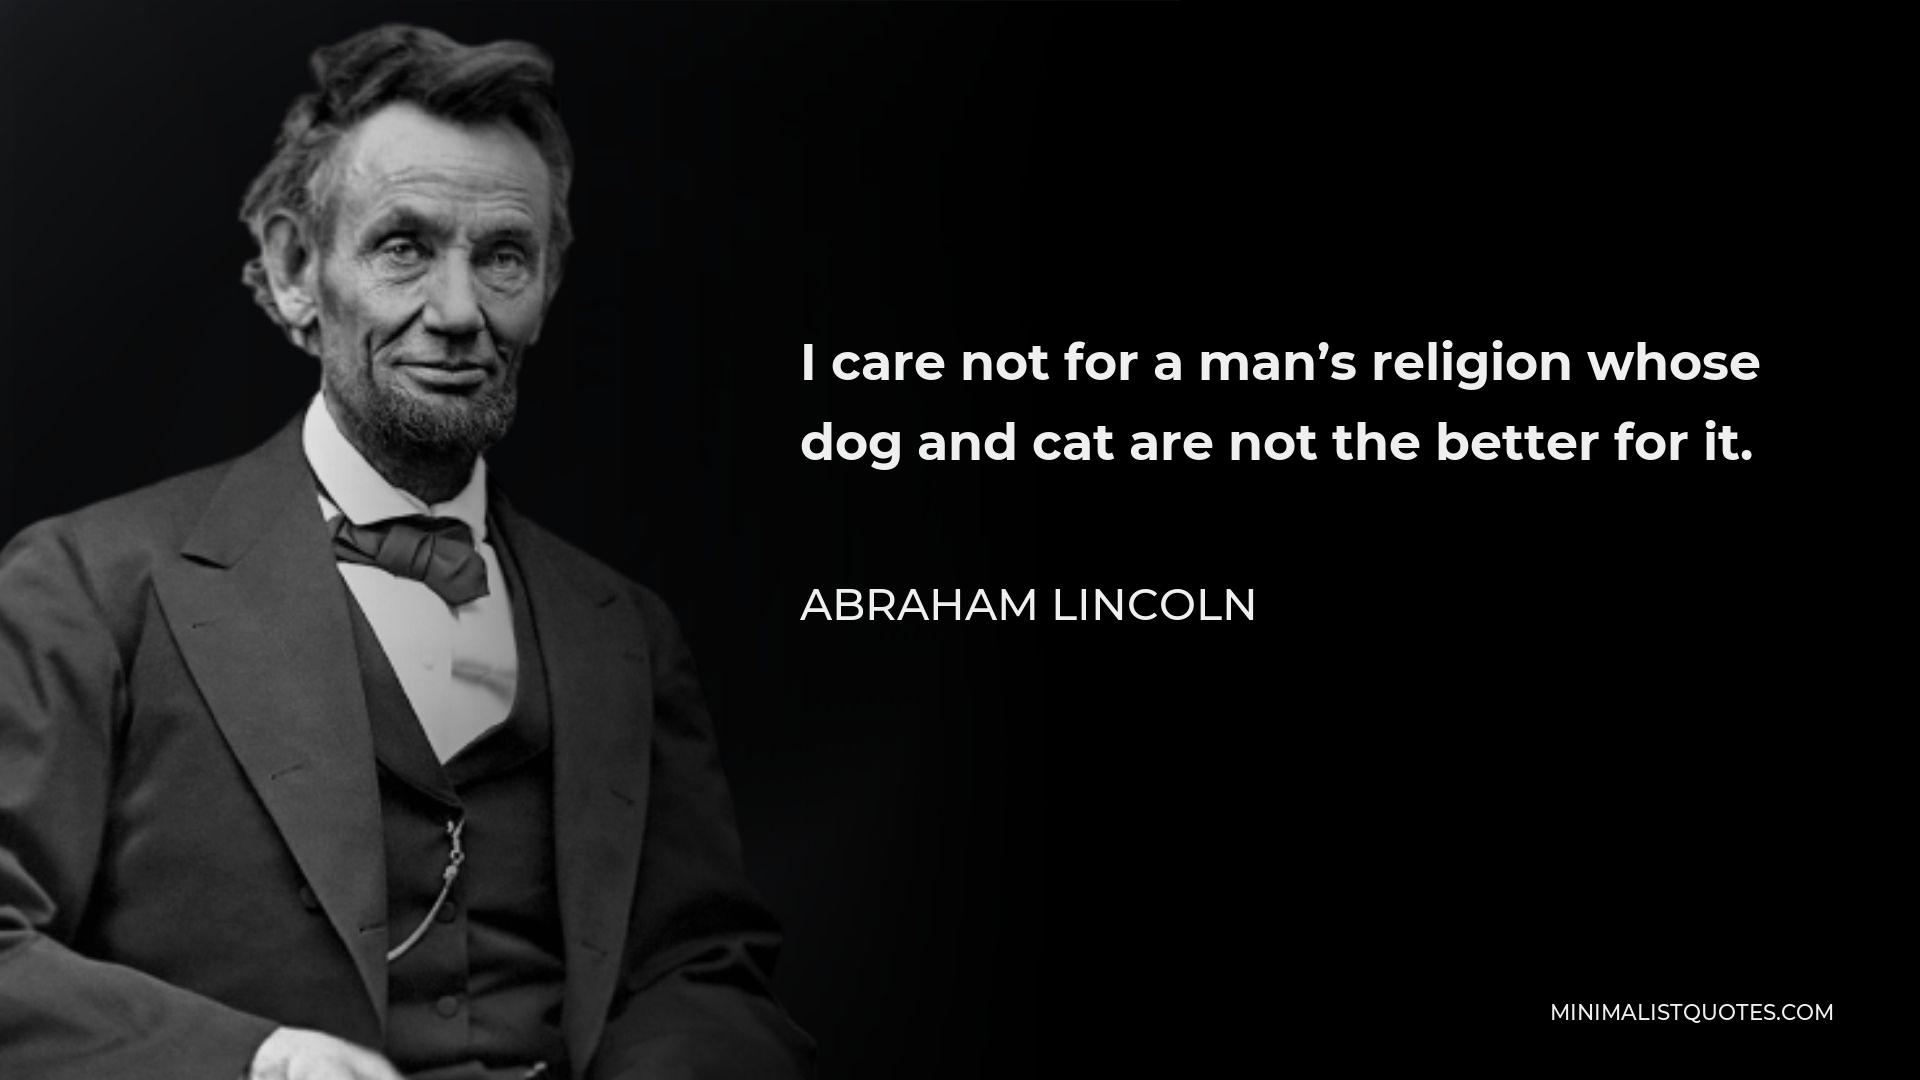 Abraham Lincoln Quote - I care not for a man’s religion whose dog and cat are not the better for it.